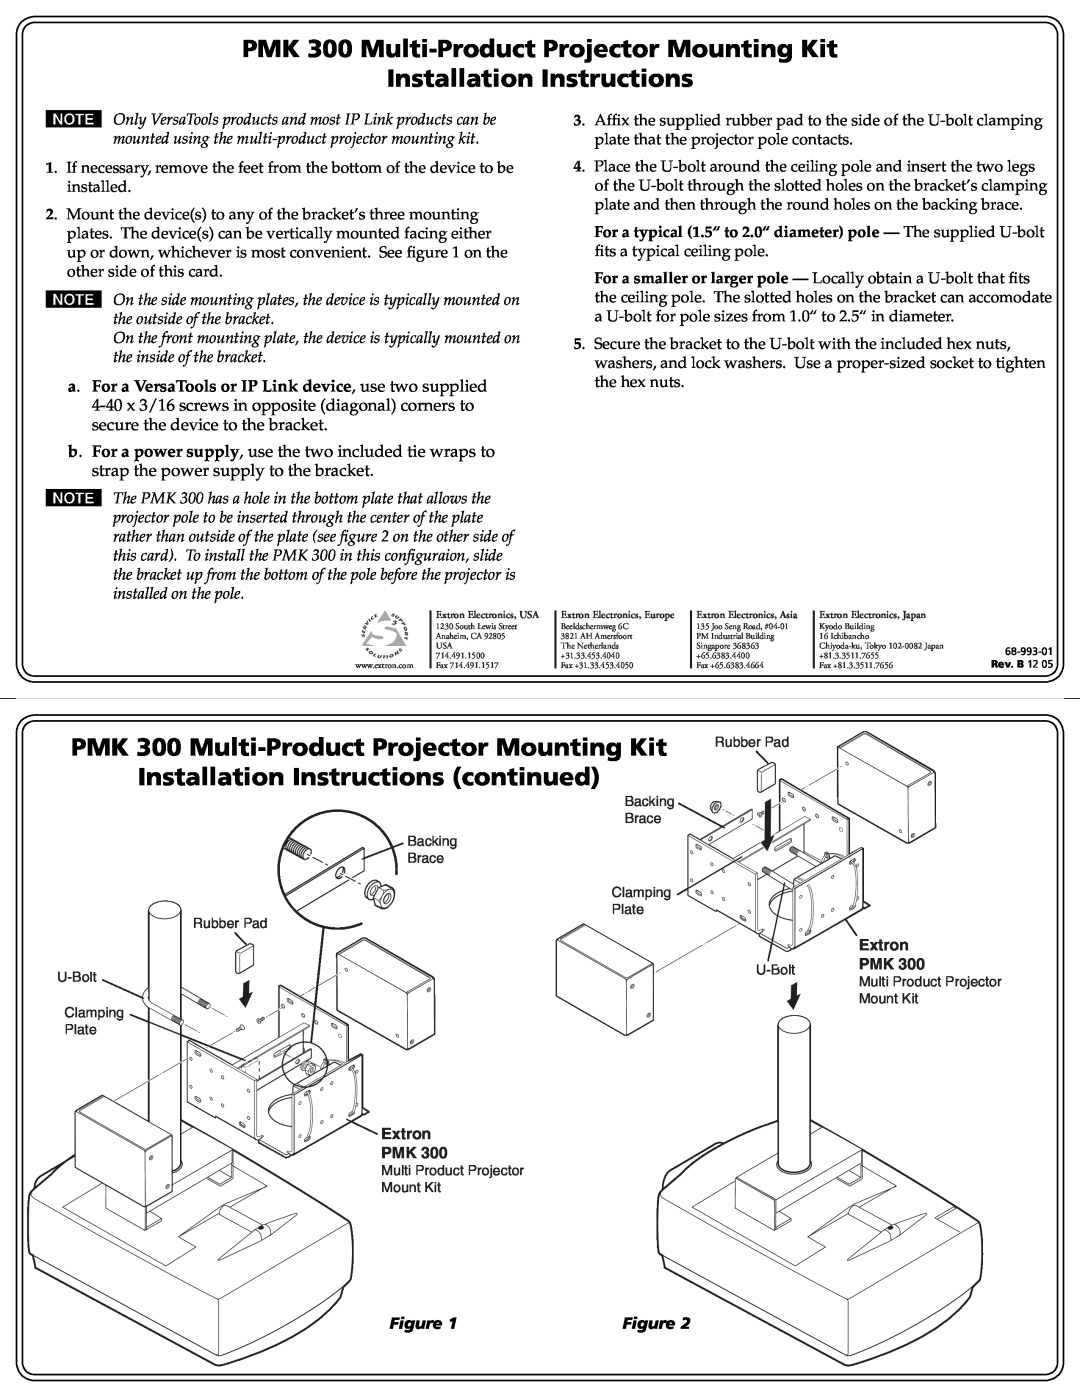 Extron electronic installation instructions PMK 300 Multi-Product Projector Mounting Kit, Installation Instructions 